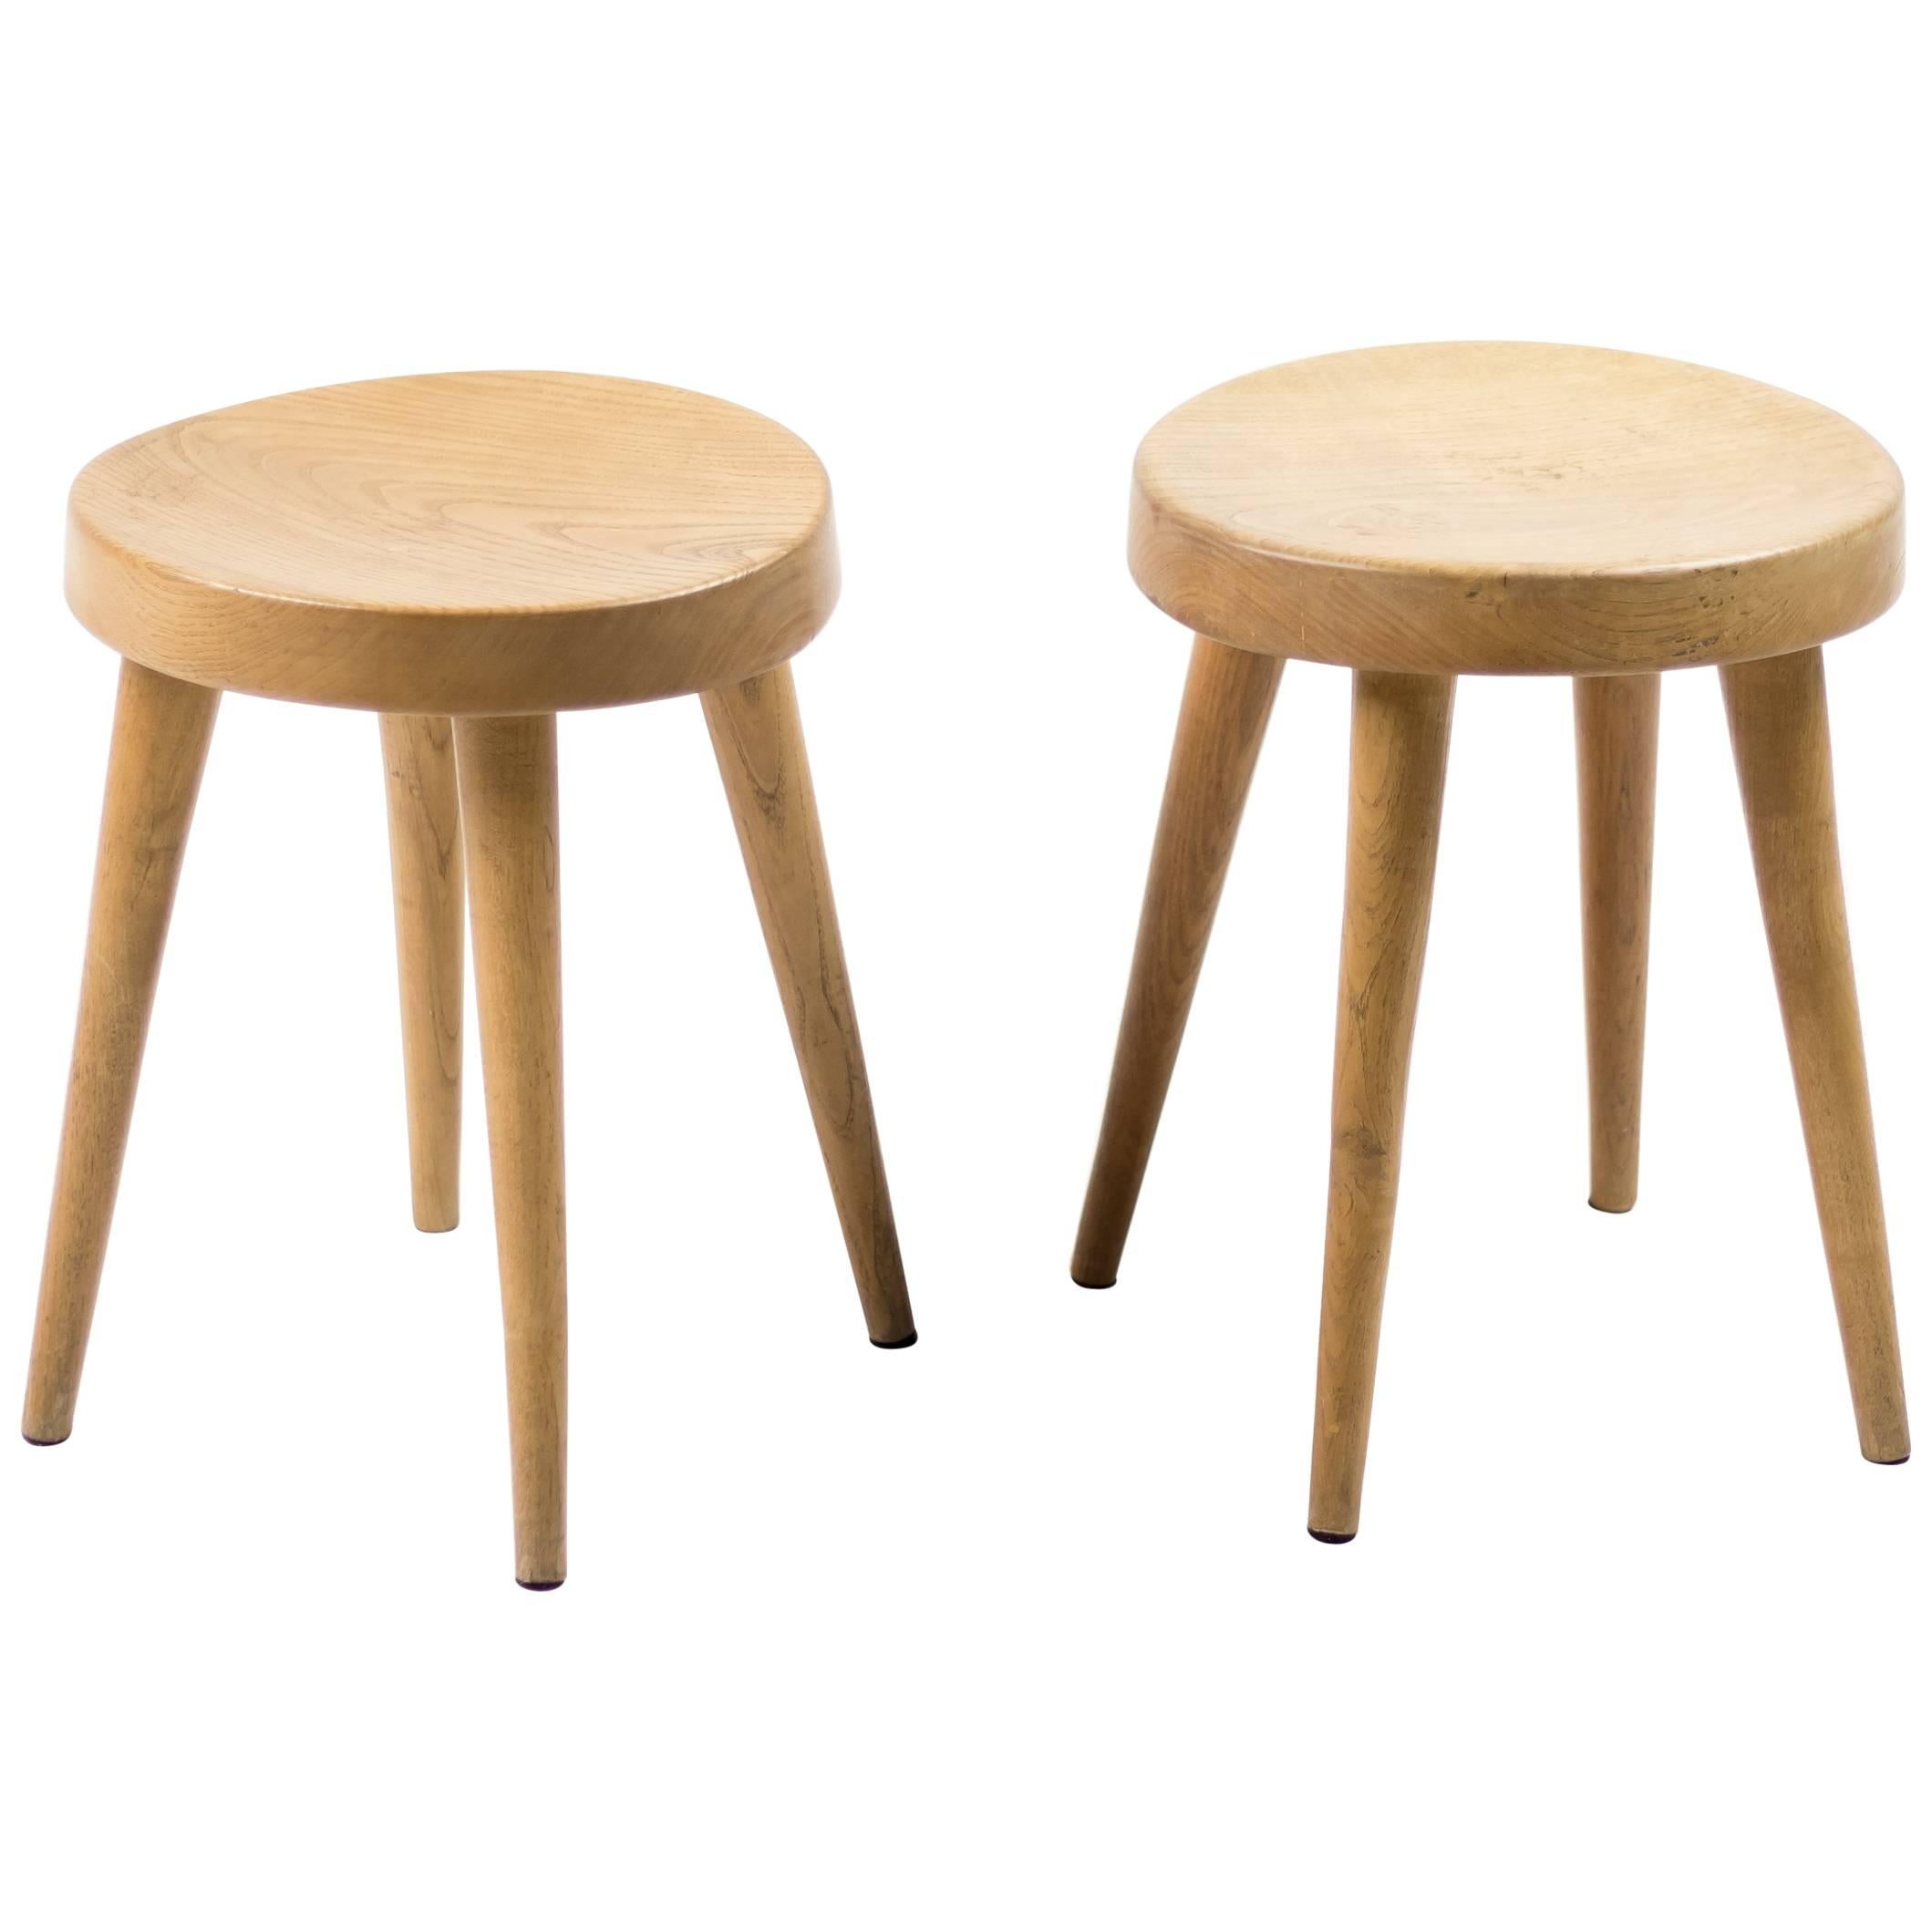 Pair of Four-Leg Stools by Charlotte Perriand for Steph Simon For Sale